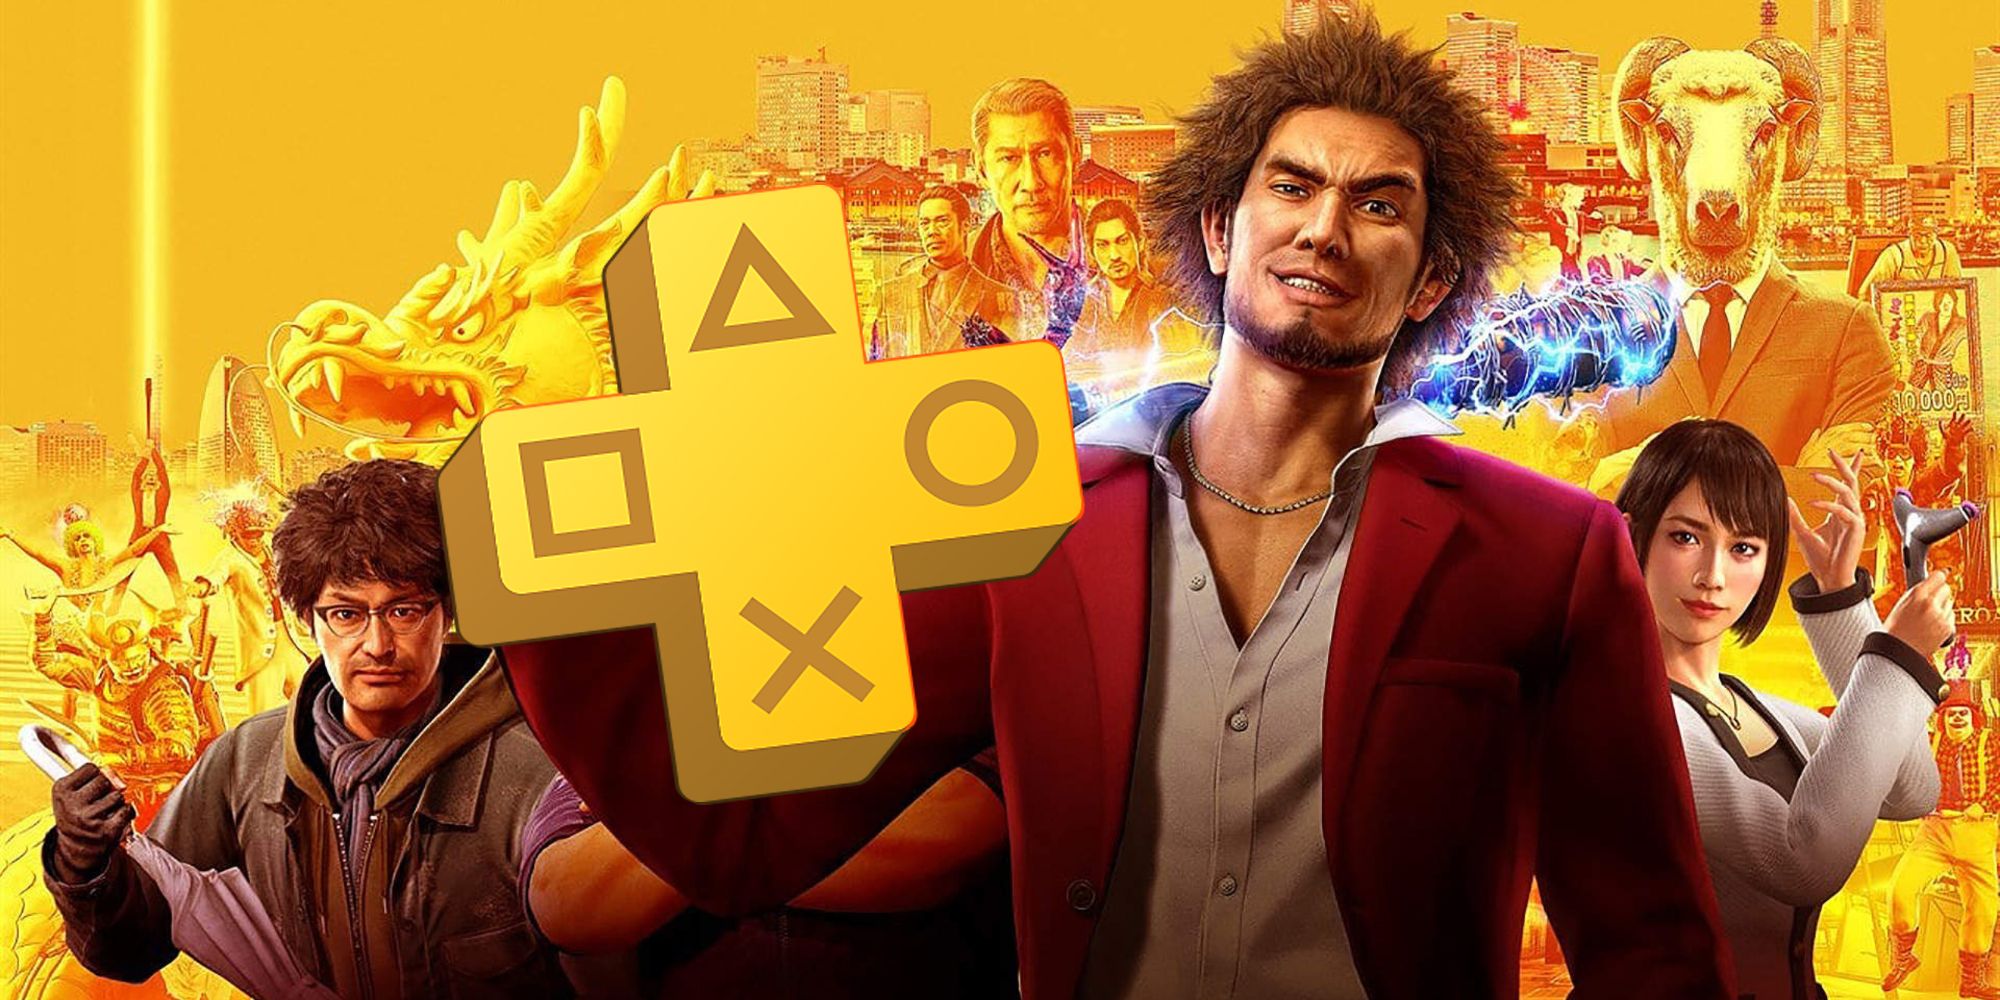 PlayStation Plus is adding 8 Yakuza games in 2022